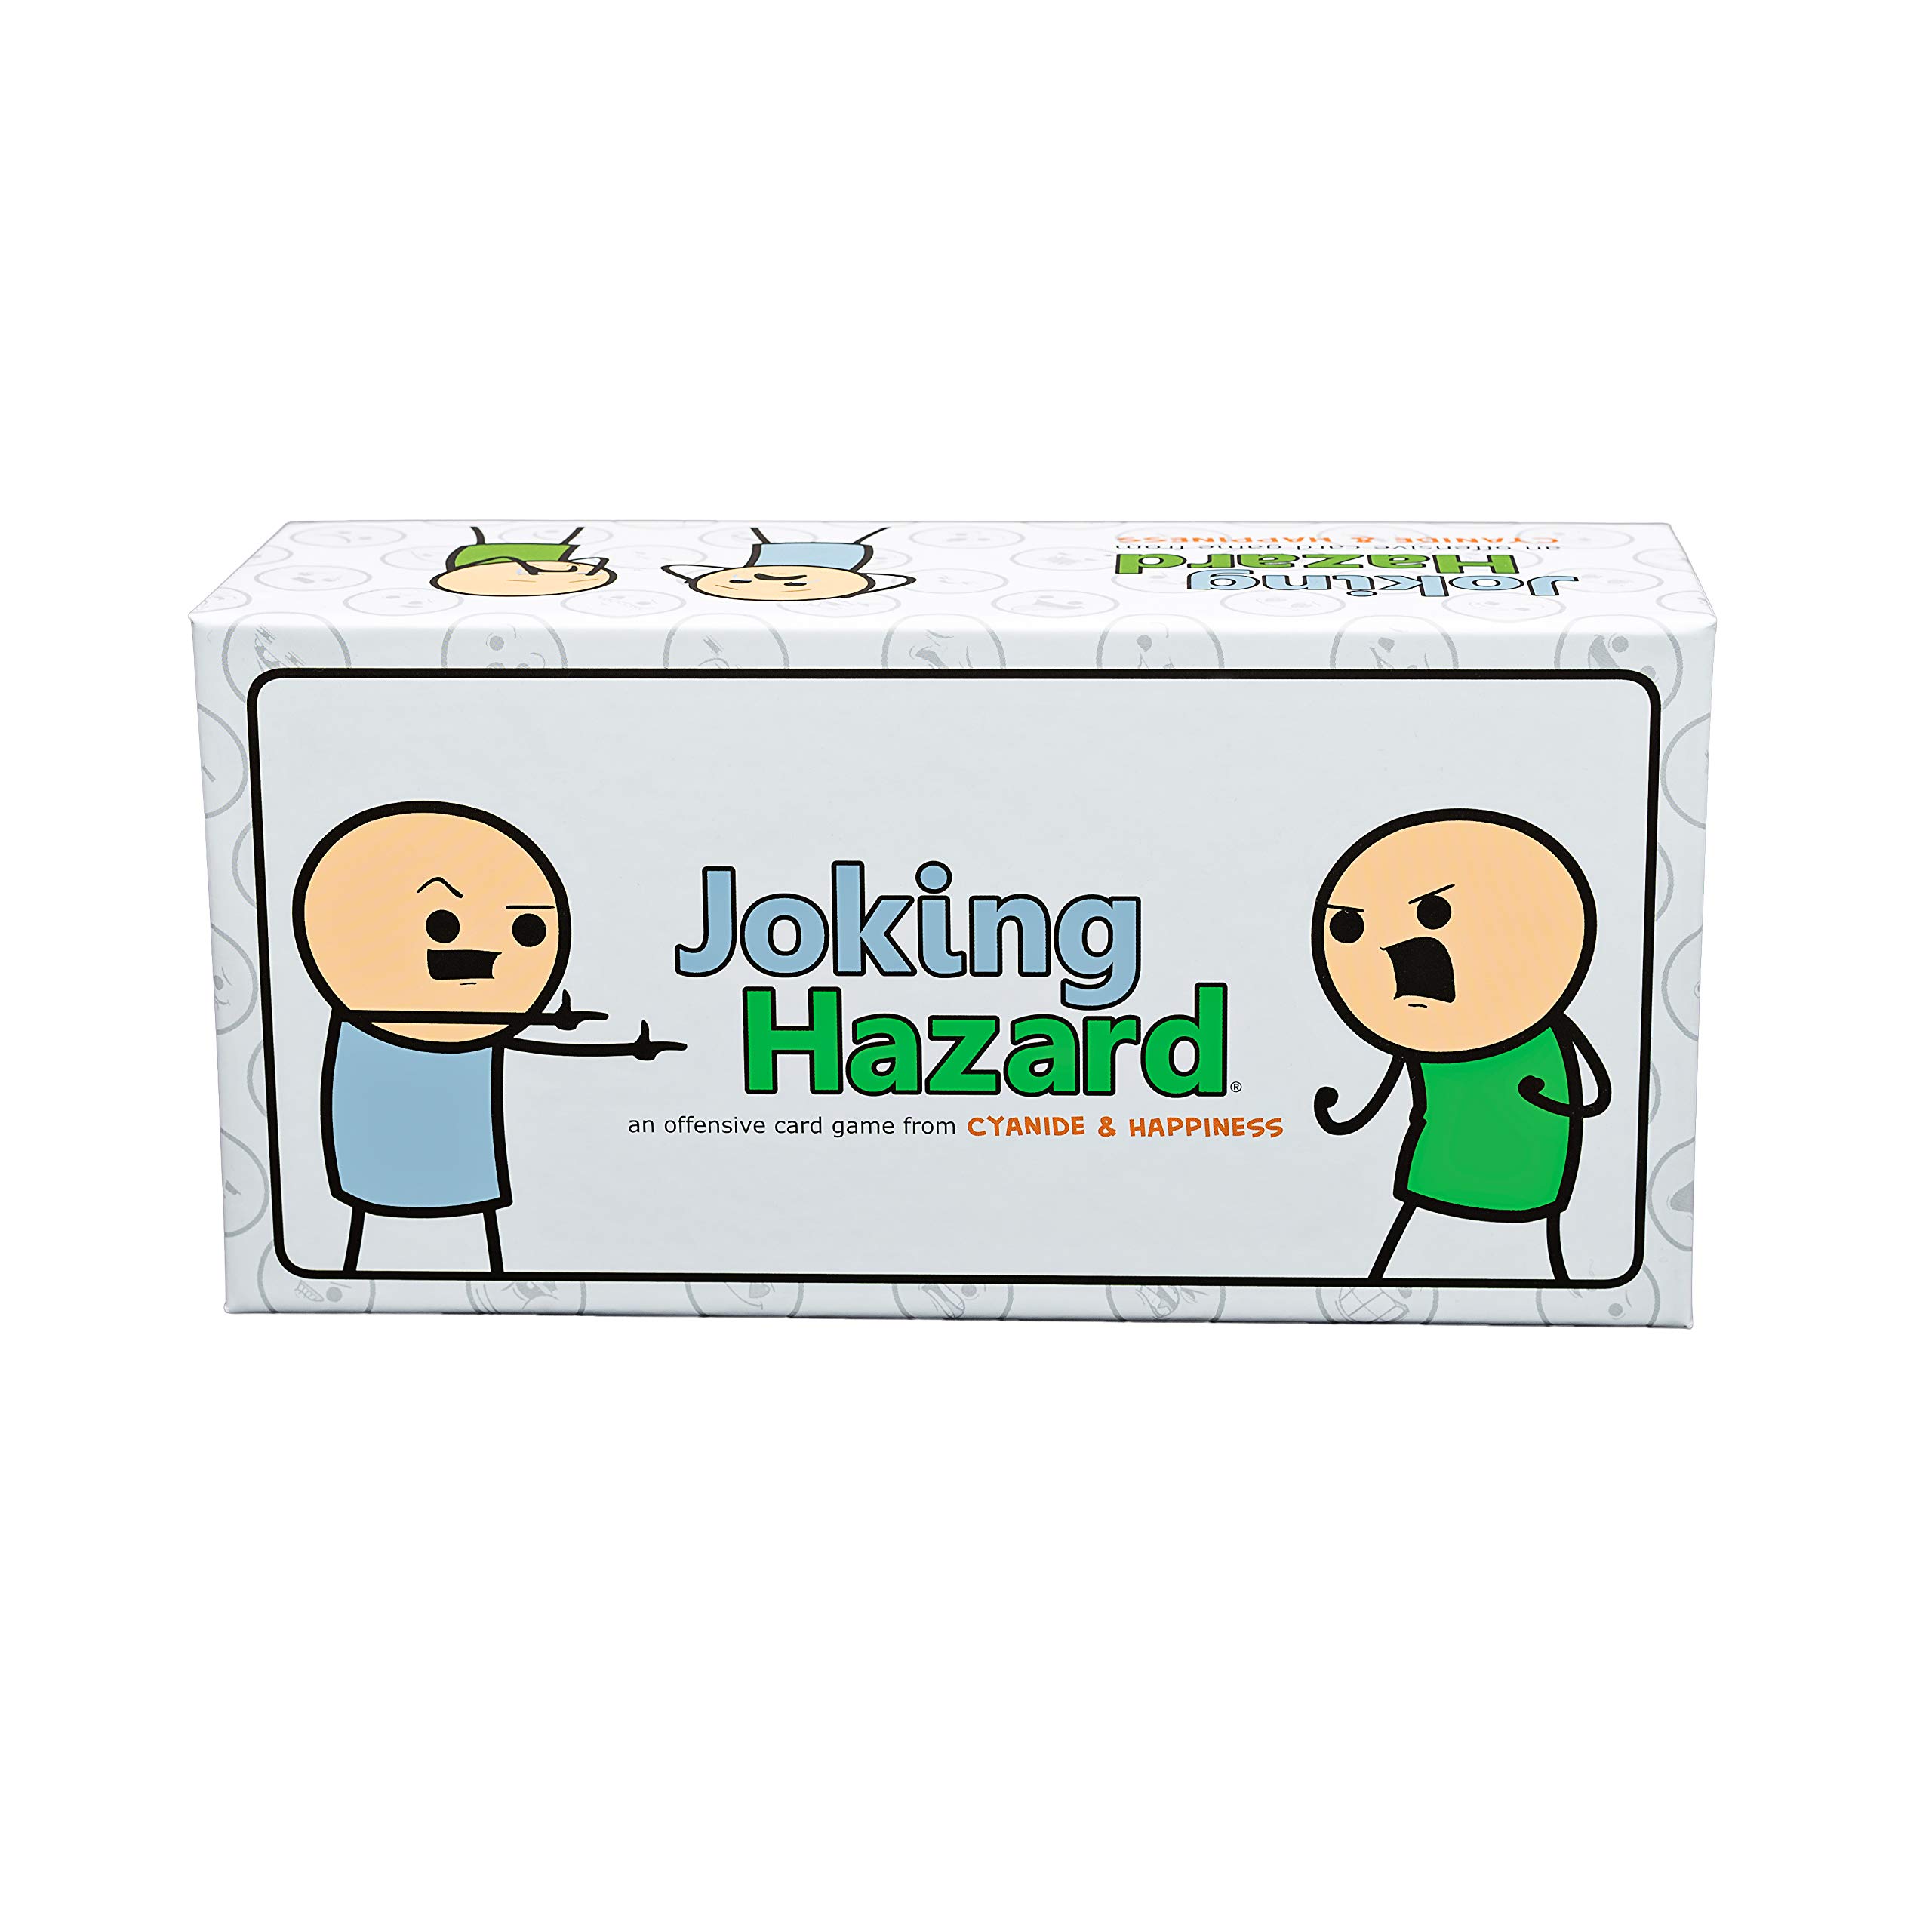 Joking Hazard Comic Building Party Game by Cyanide & Happiness $6.60 + Free Shipping w/ Prime or on $35+